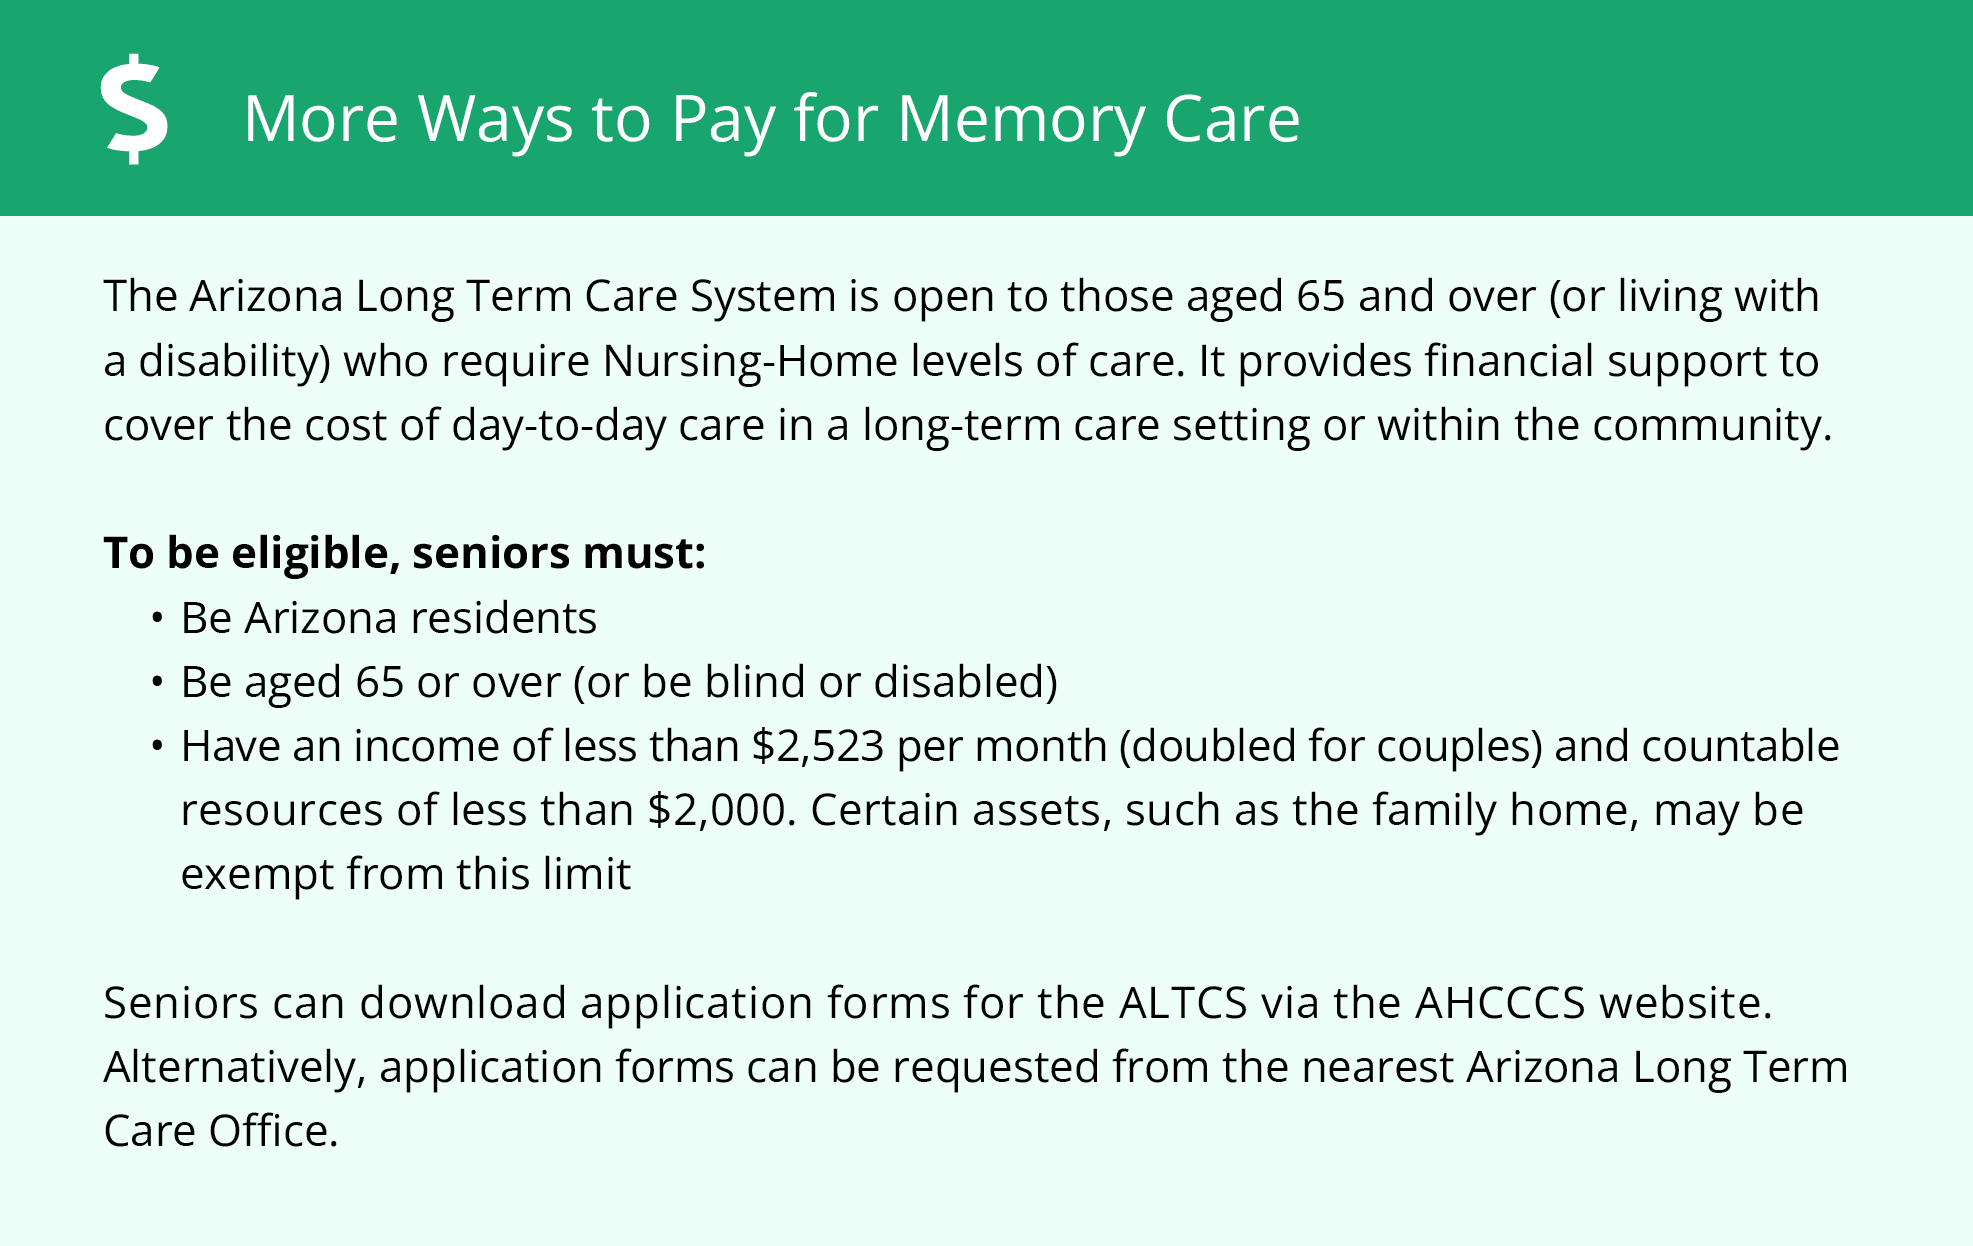 More ways to pay for memory care in Arizona